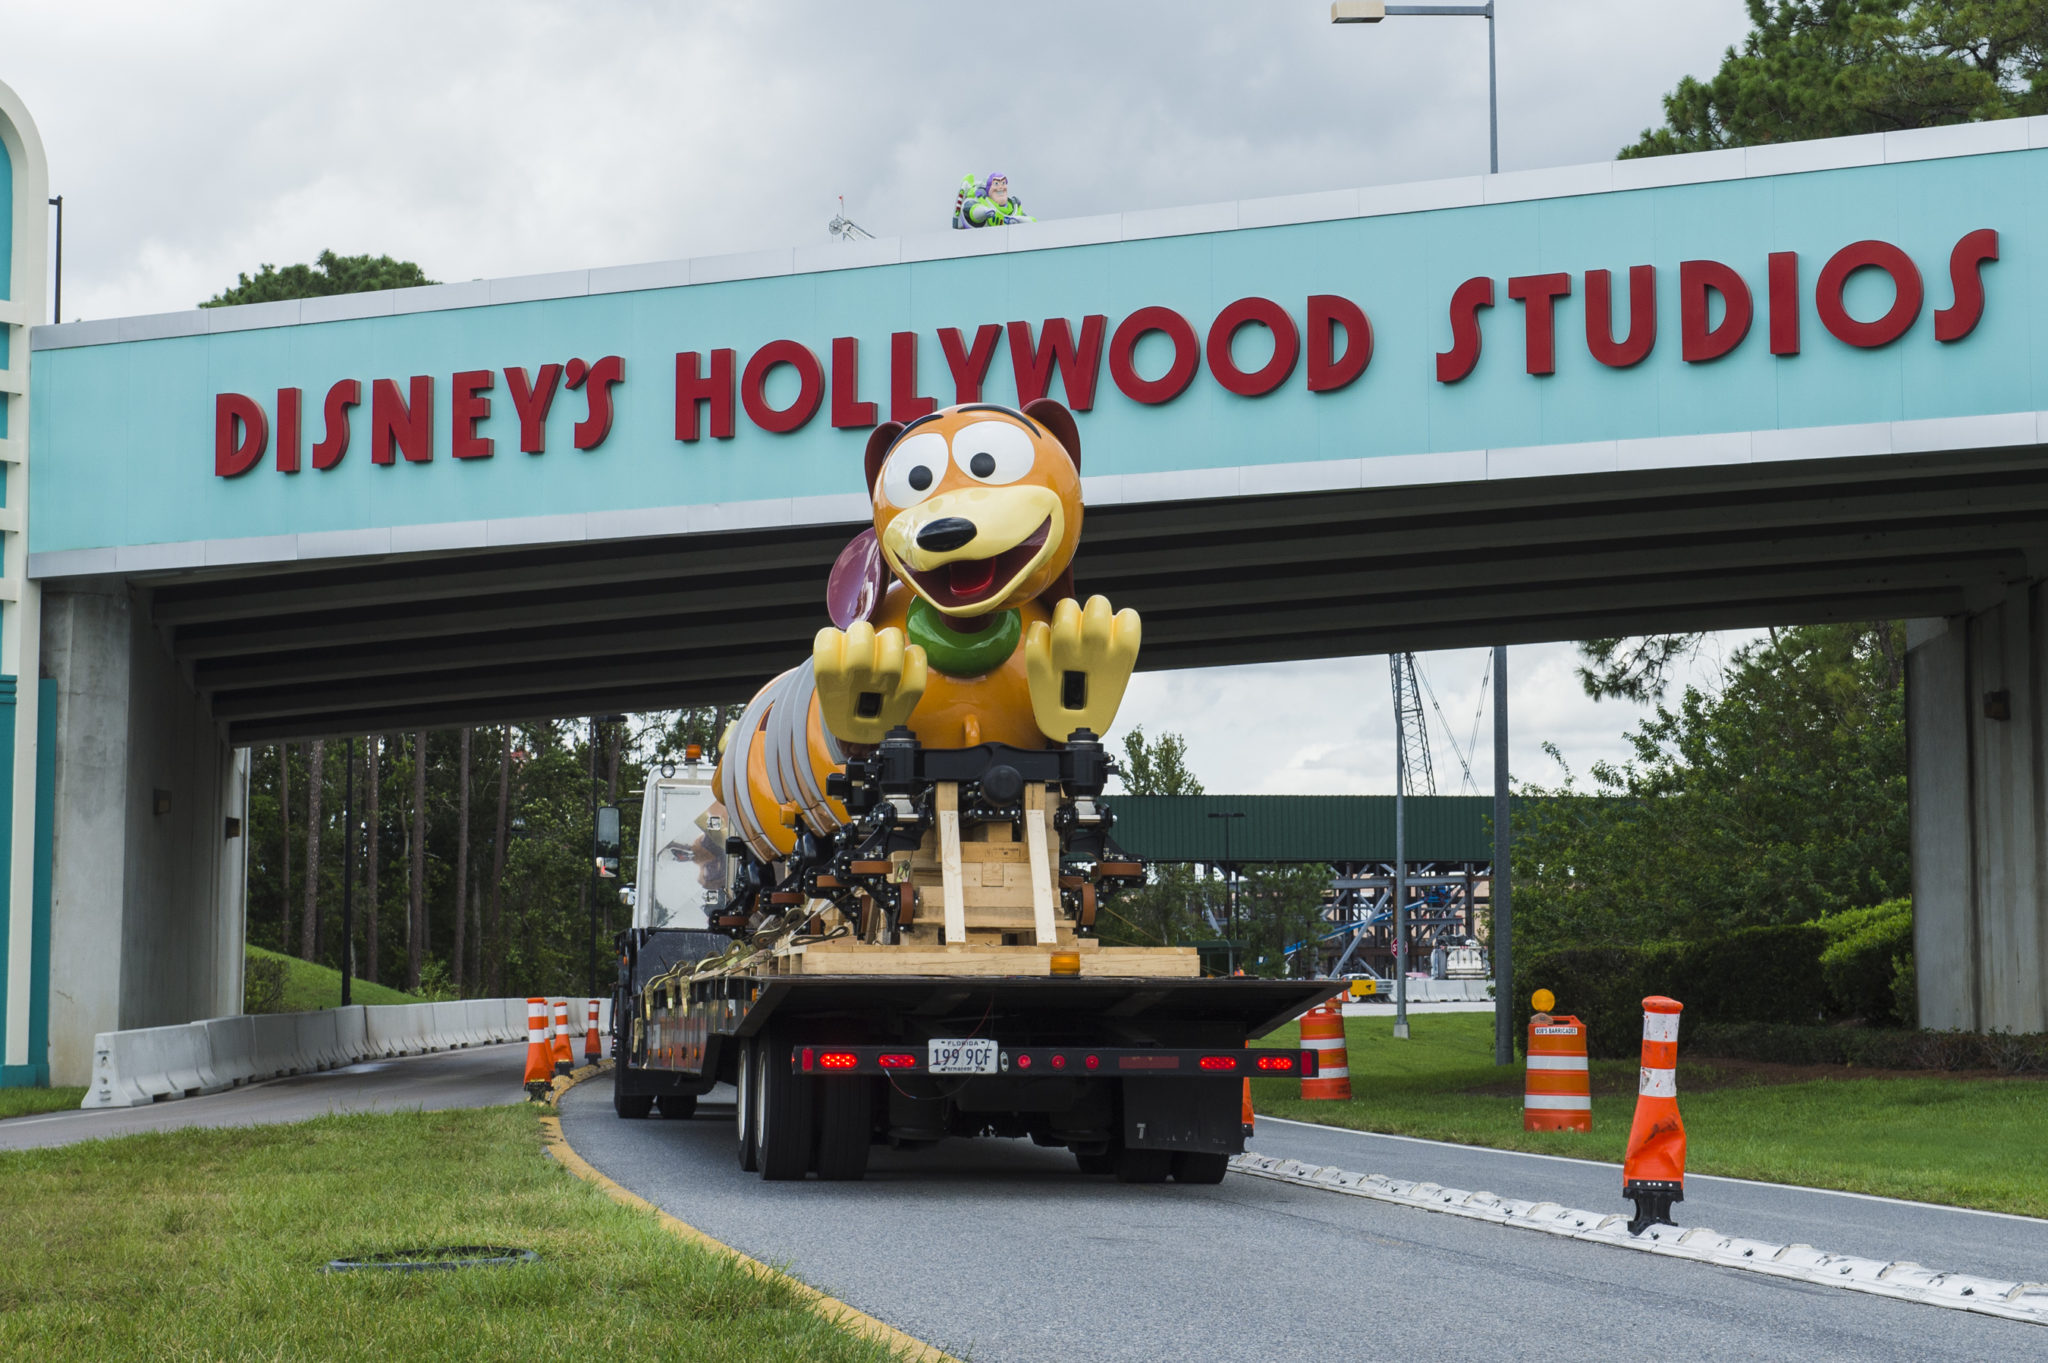 Hollywood Studios Changes Operating Hours, Adds Extra Magic Hours in July for Toy Story Land